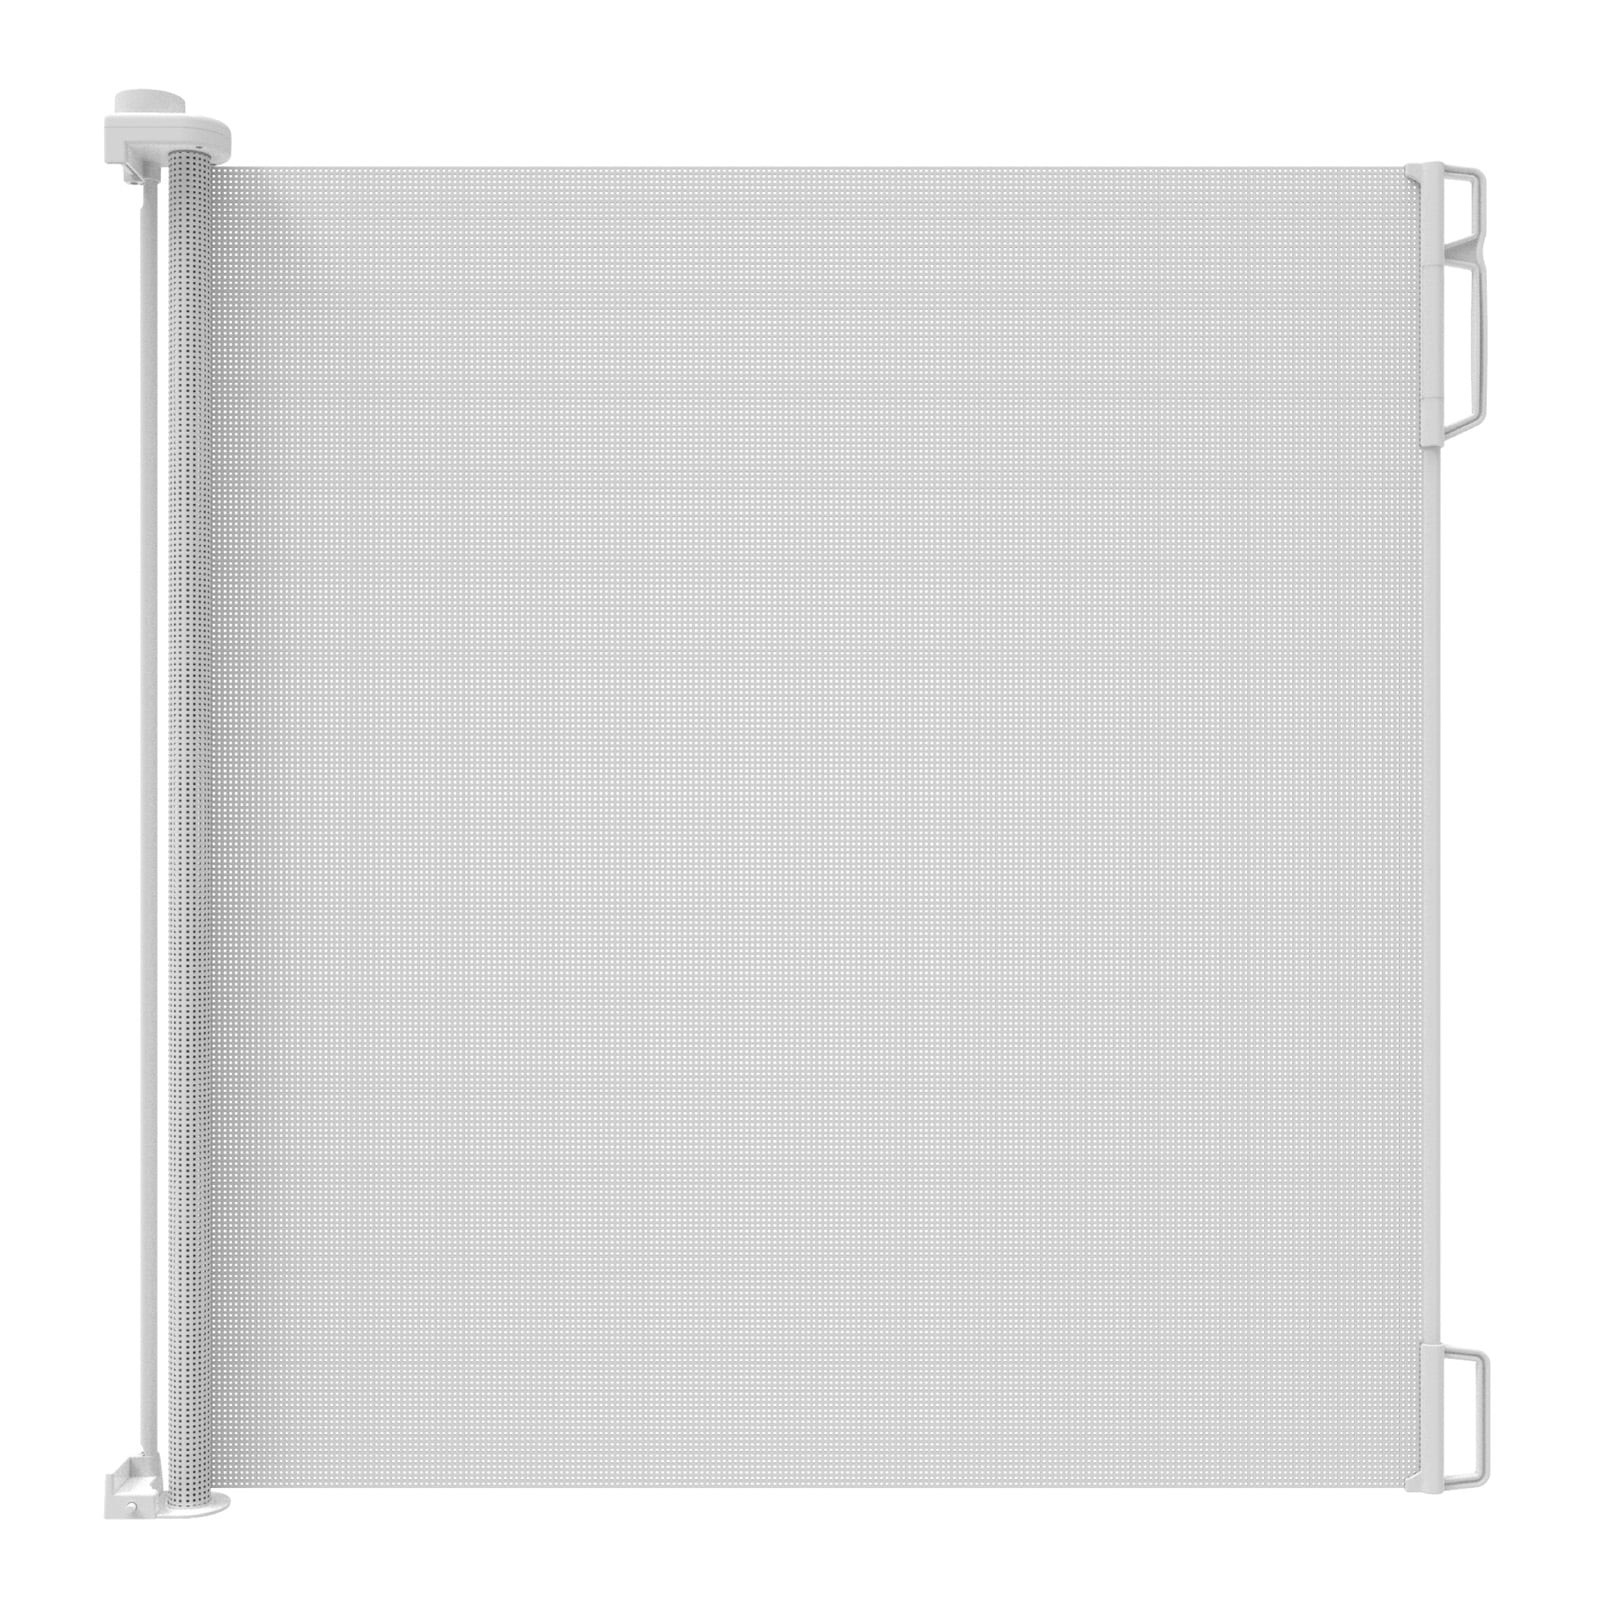 Panasonic A2011-3280S Ceiling Plate 